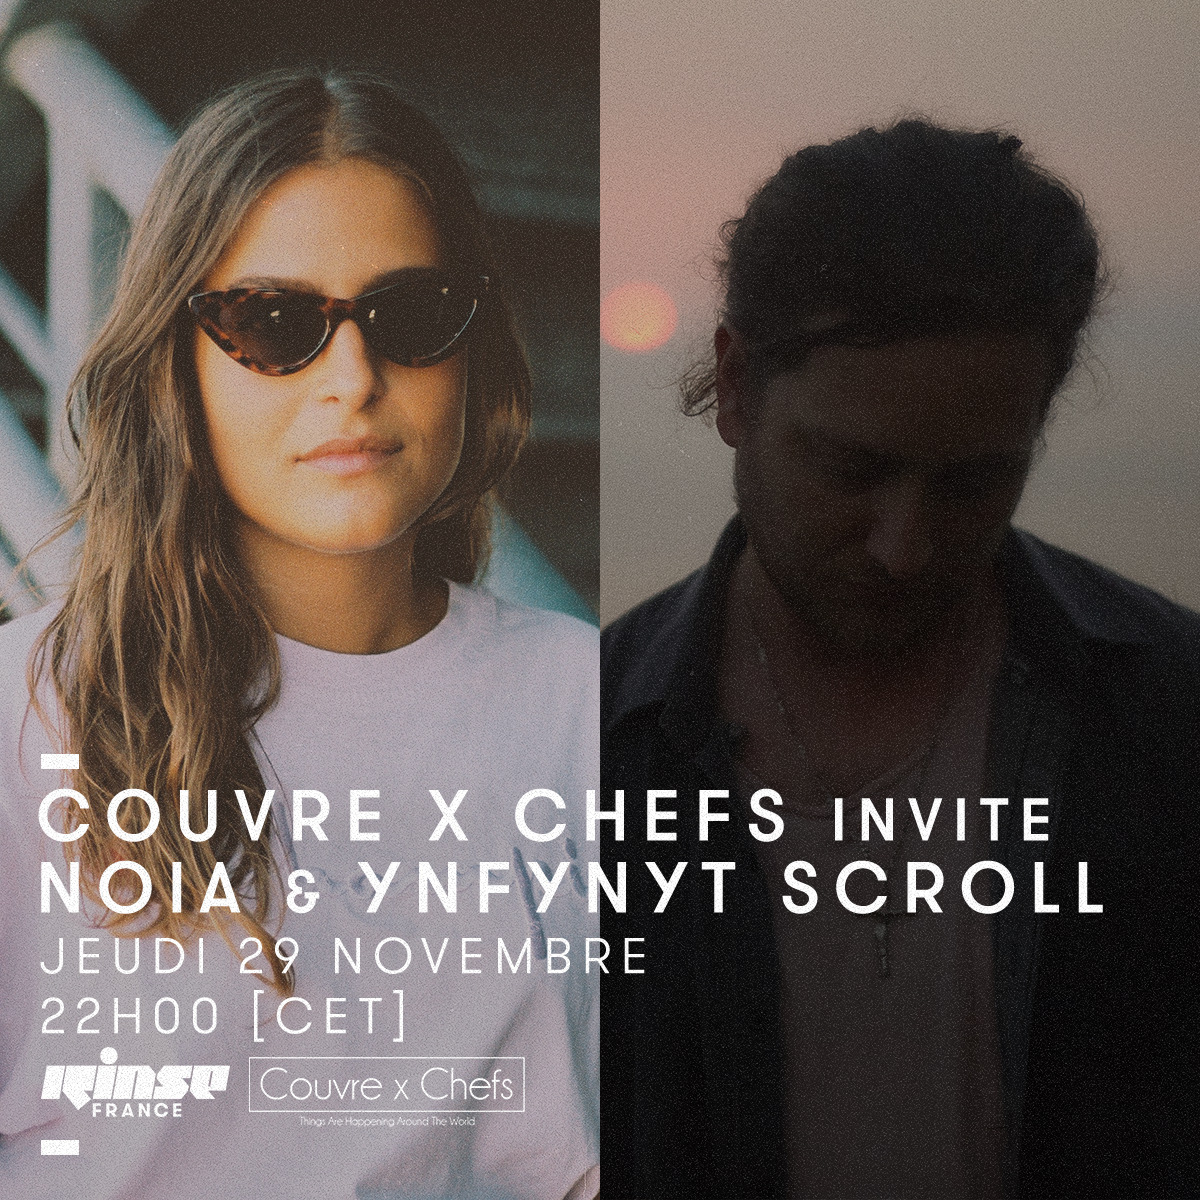 NOIA-Ynfynyt-couvre-x-chefs